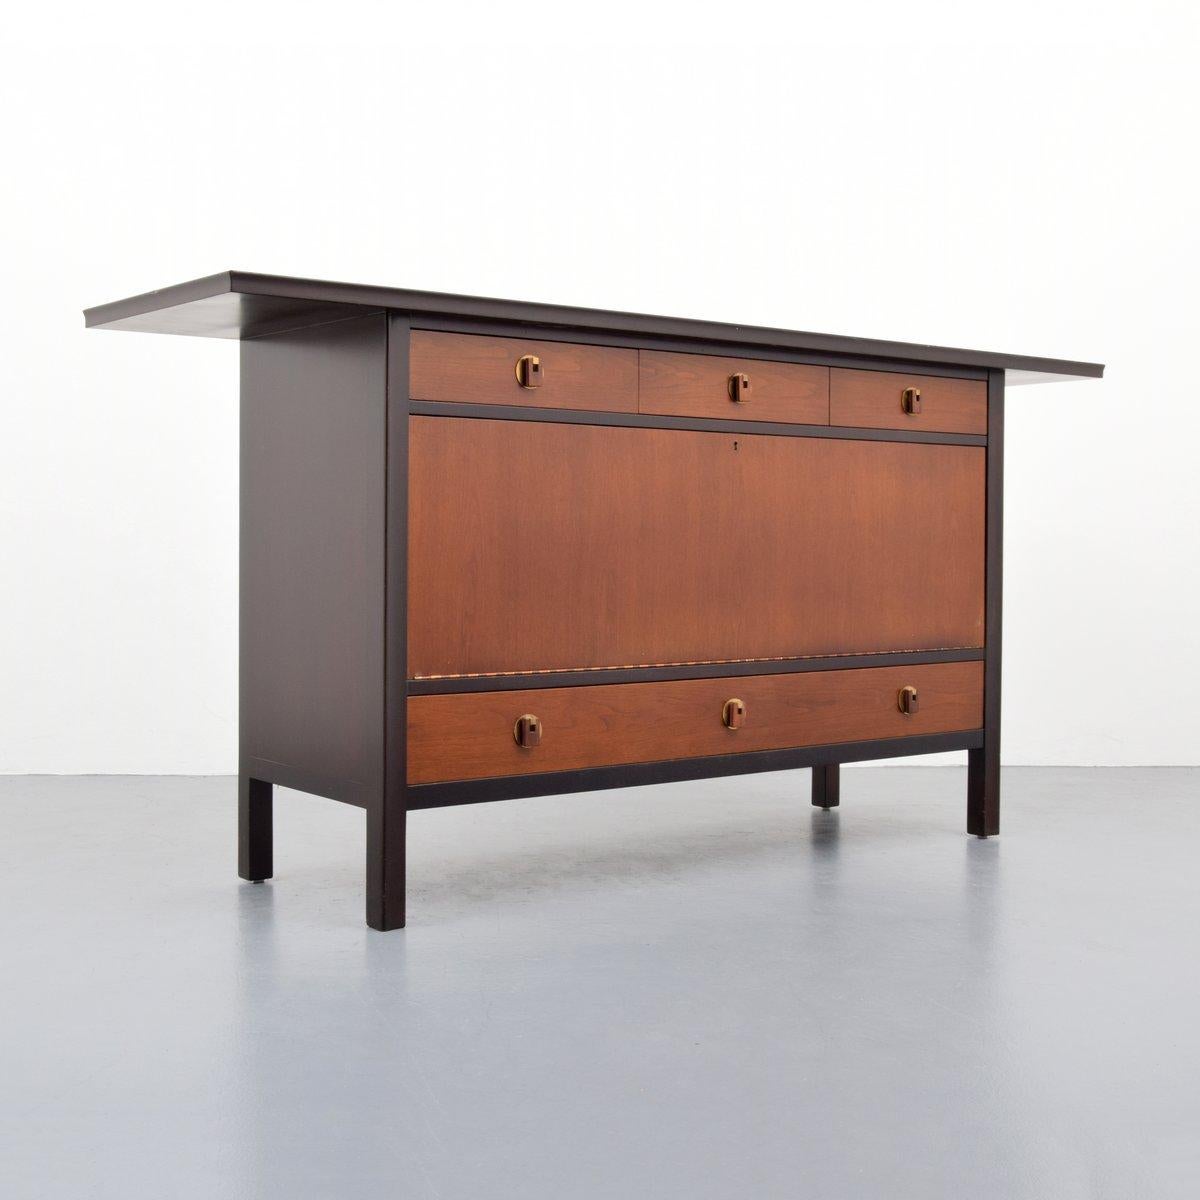 Cabinet by Edward Wormley. Cabinet has three upper drawers and one large lower drawer. Key opens a central door revealing two storage sections, one with an adjustable shelf.

Marking: Dunbar plaque.